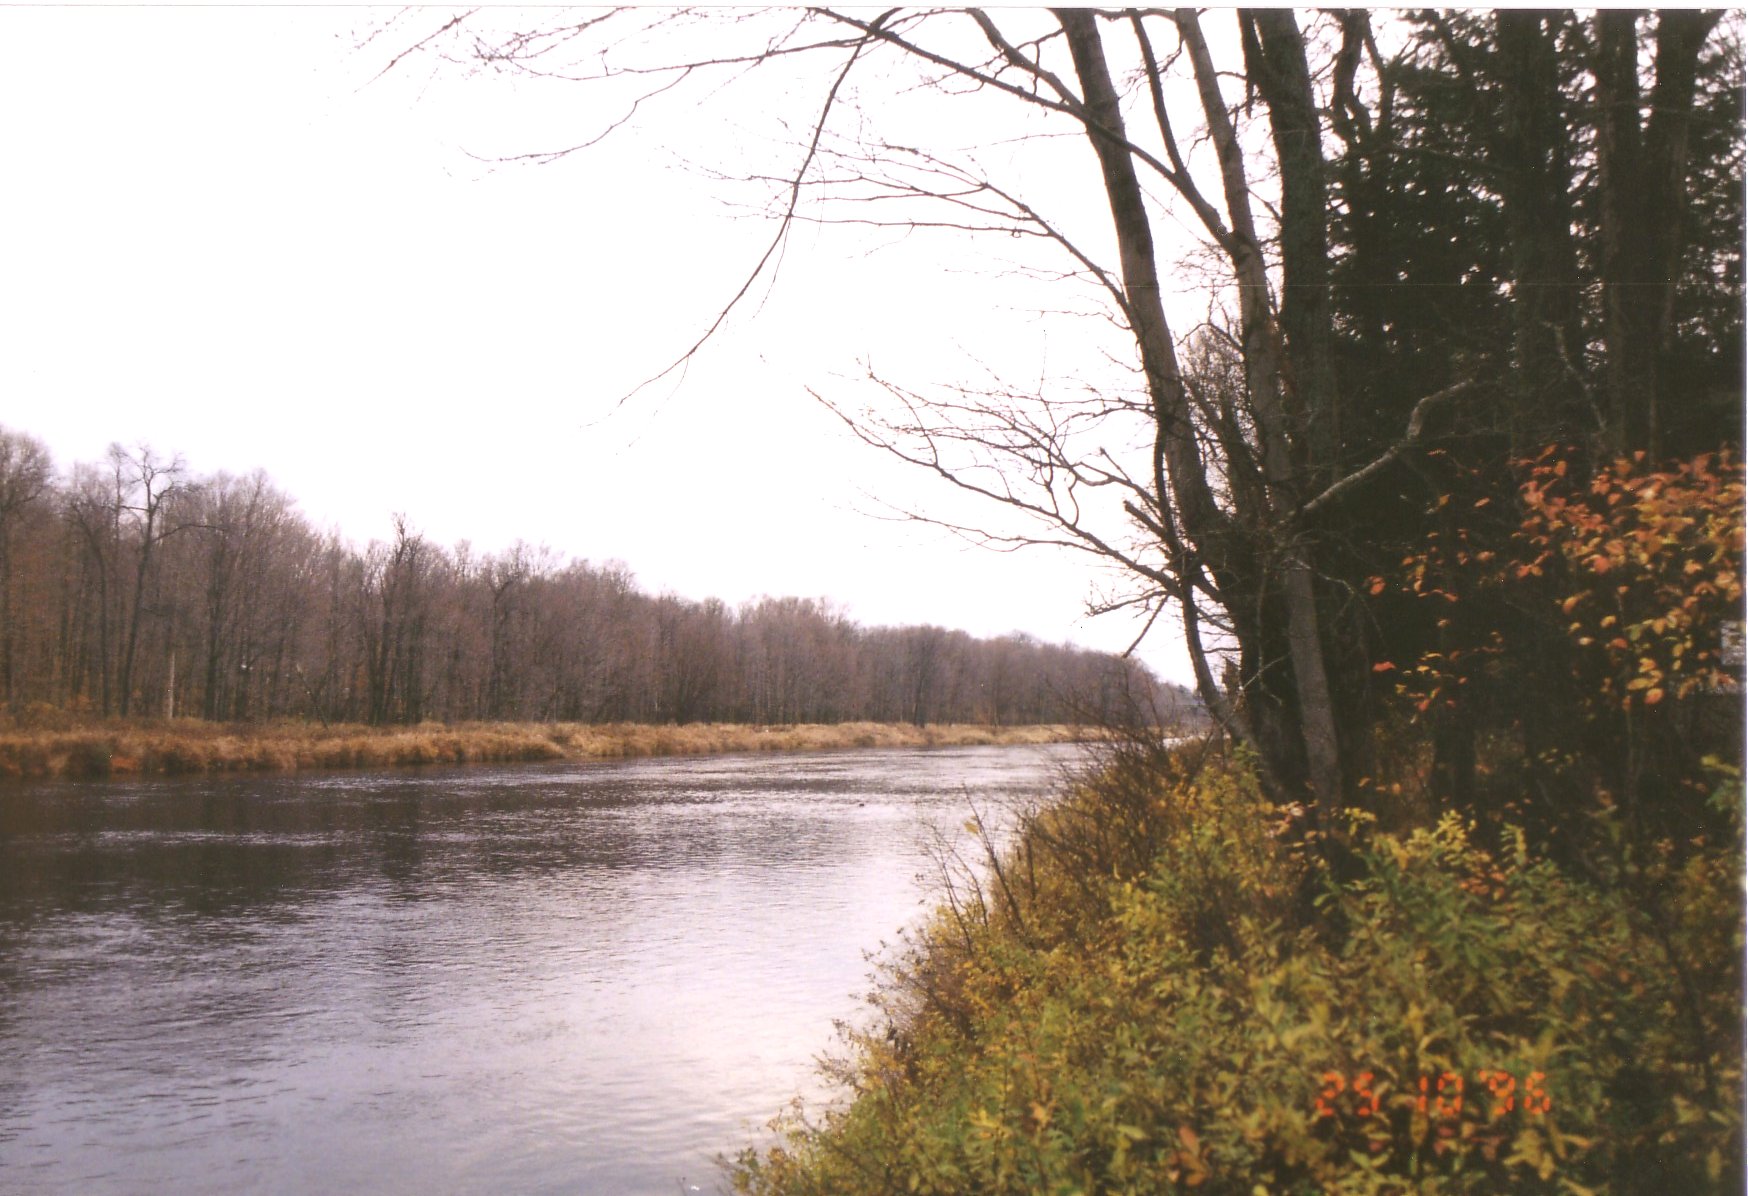 Photograph of the Moose River at McKeever, NY (MCKN6)